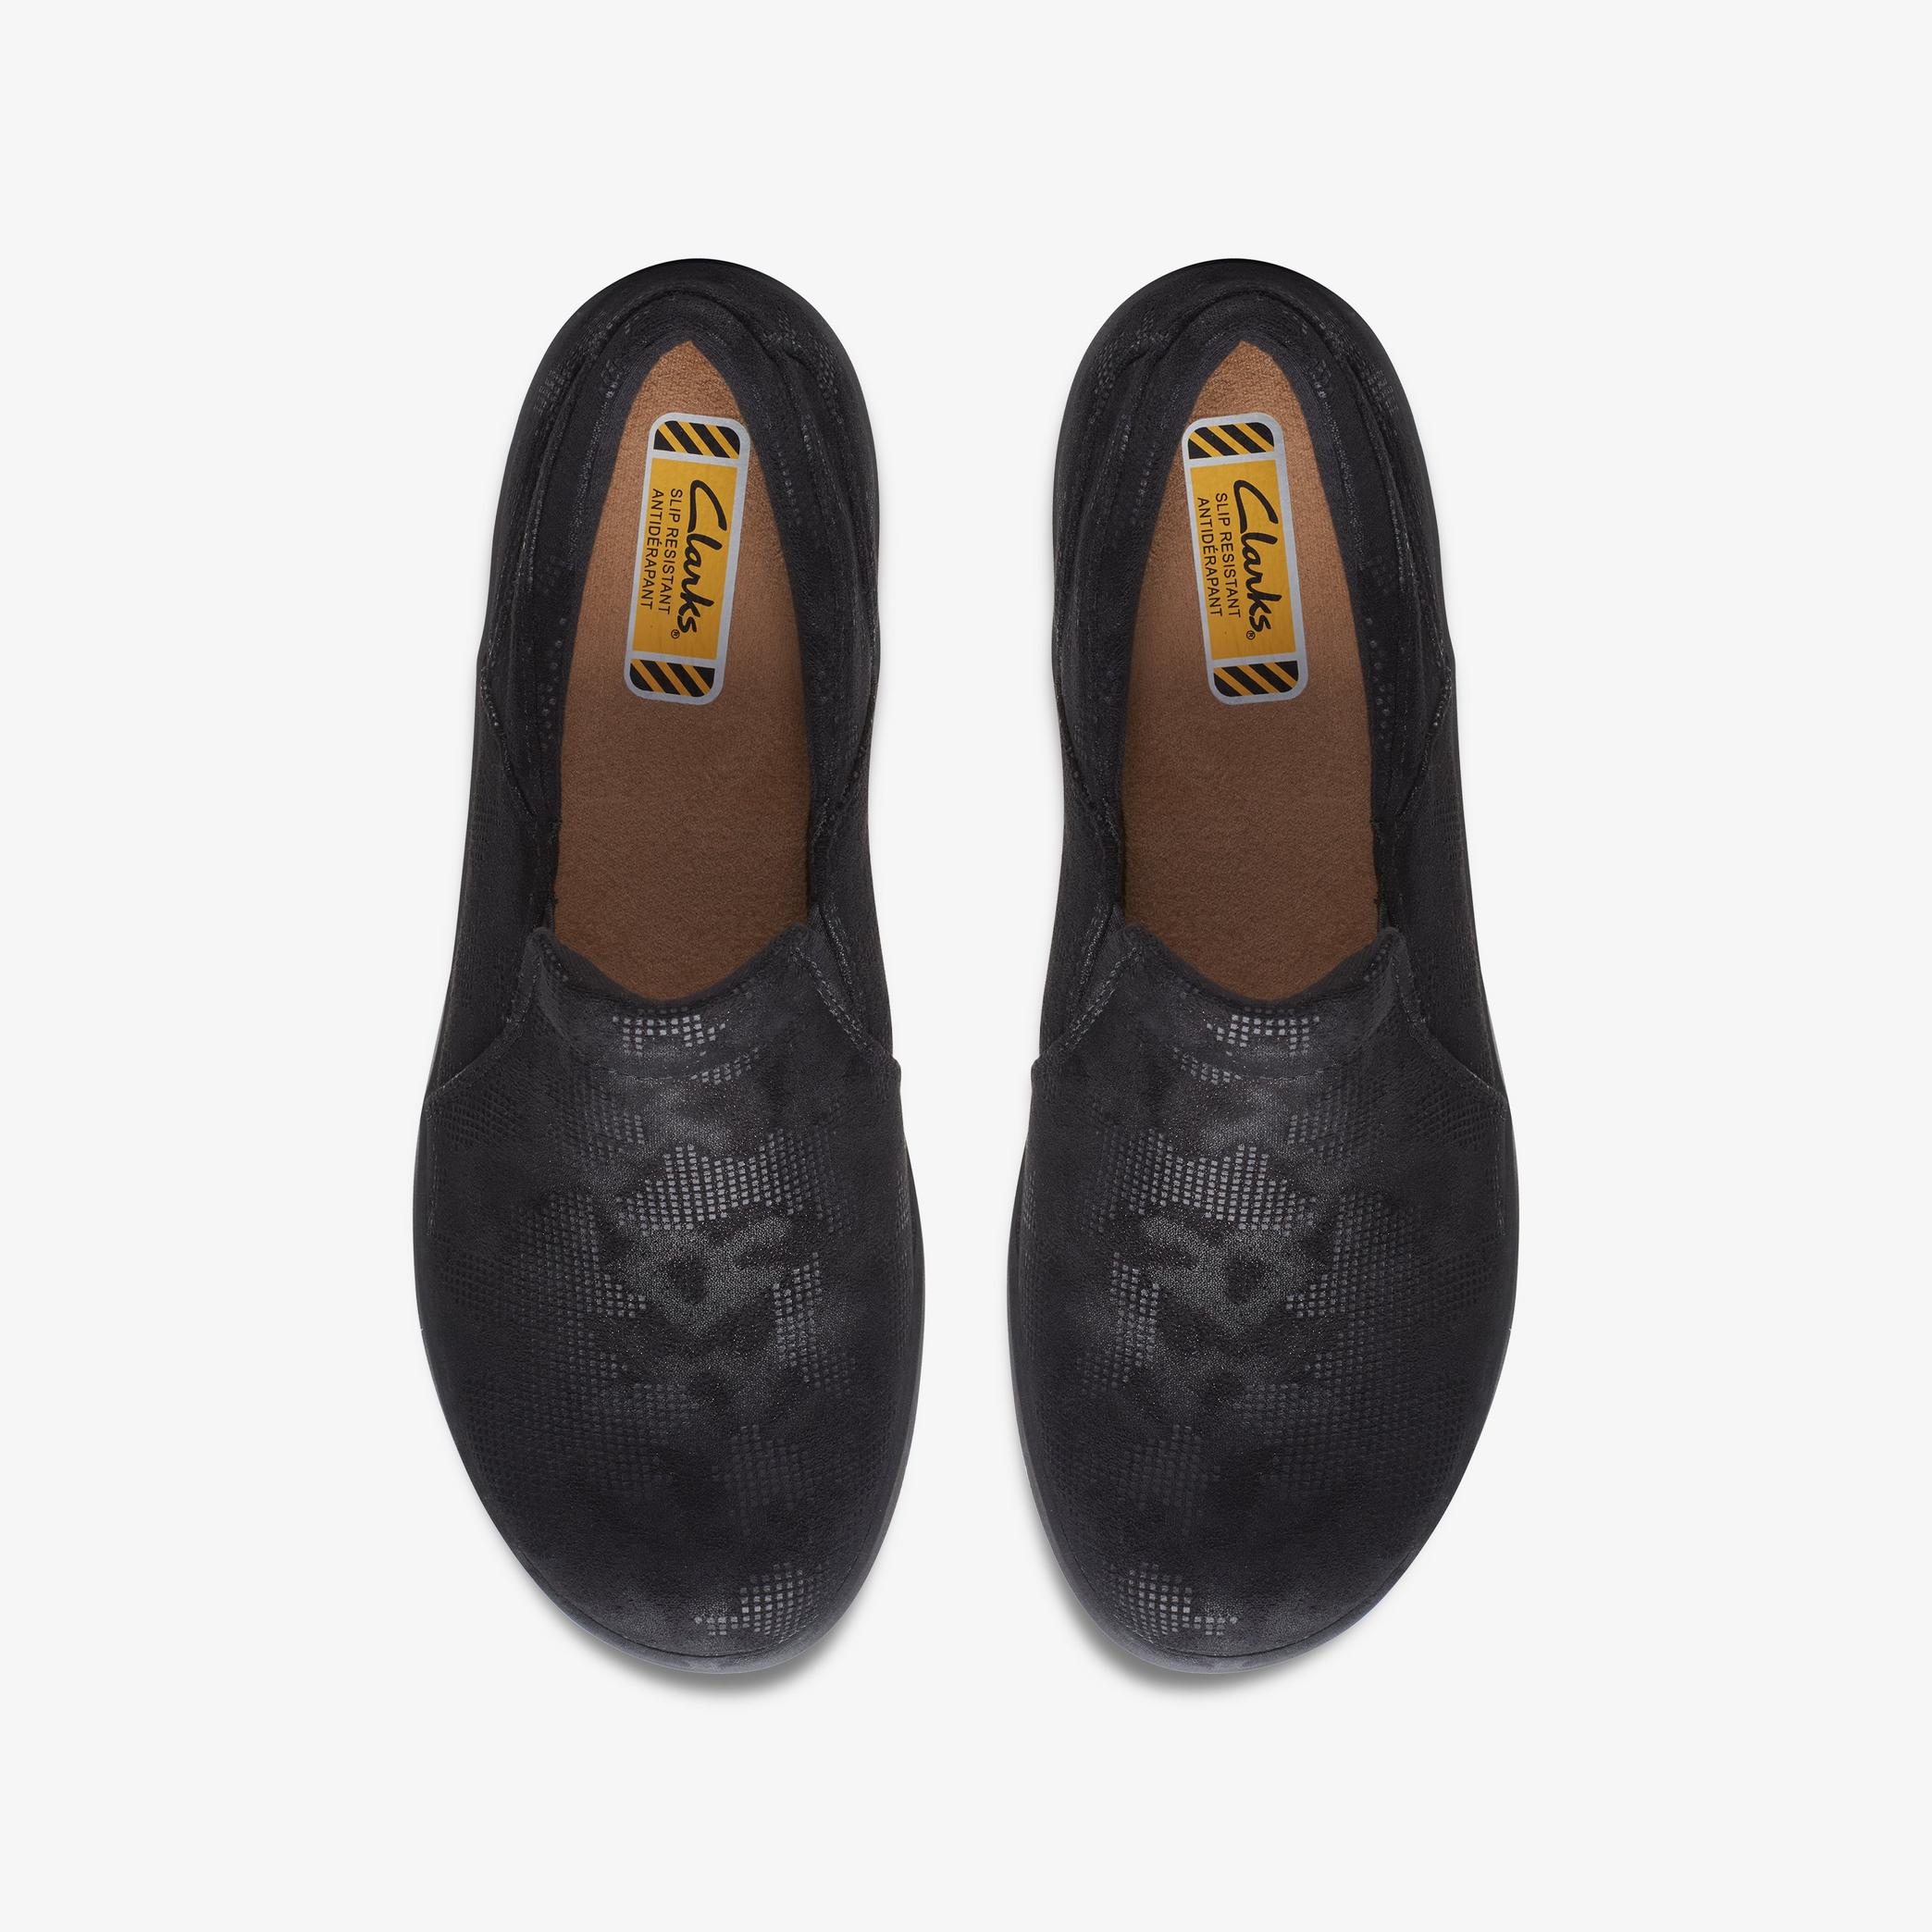 Talene Pace Black Interest Slip Ons, view 6 of 6